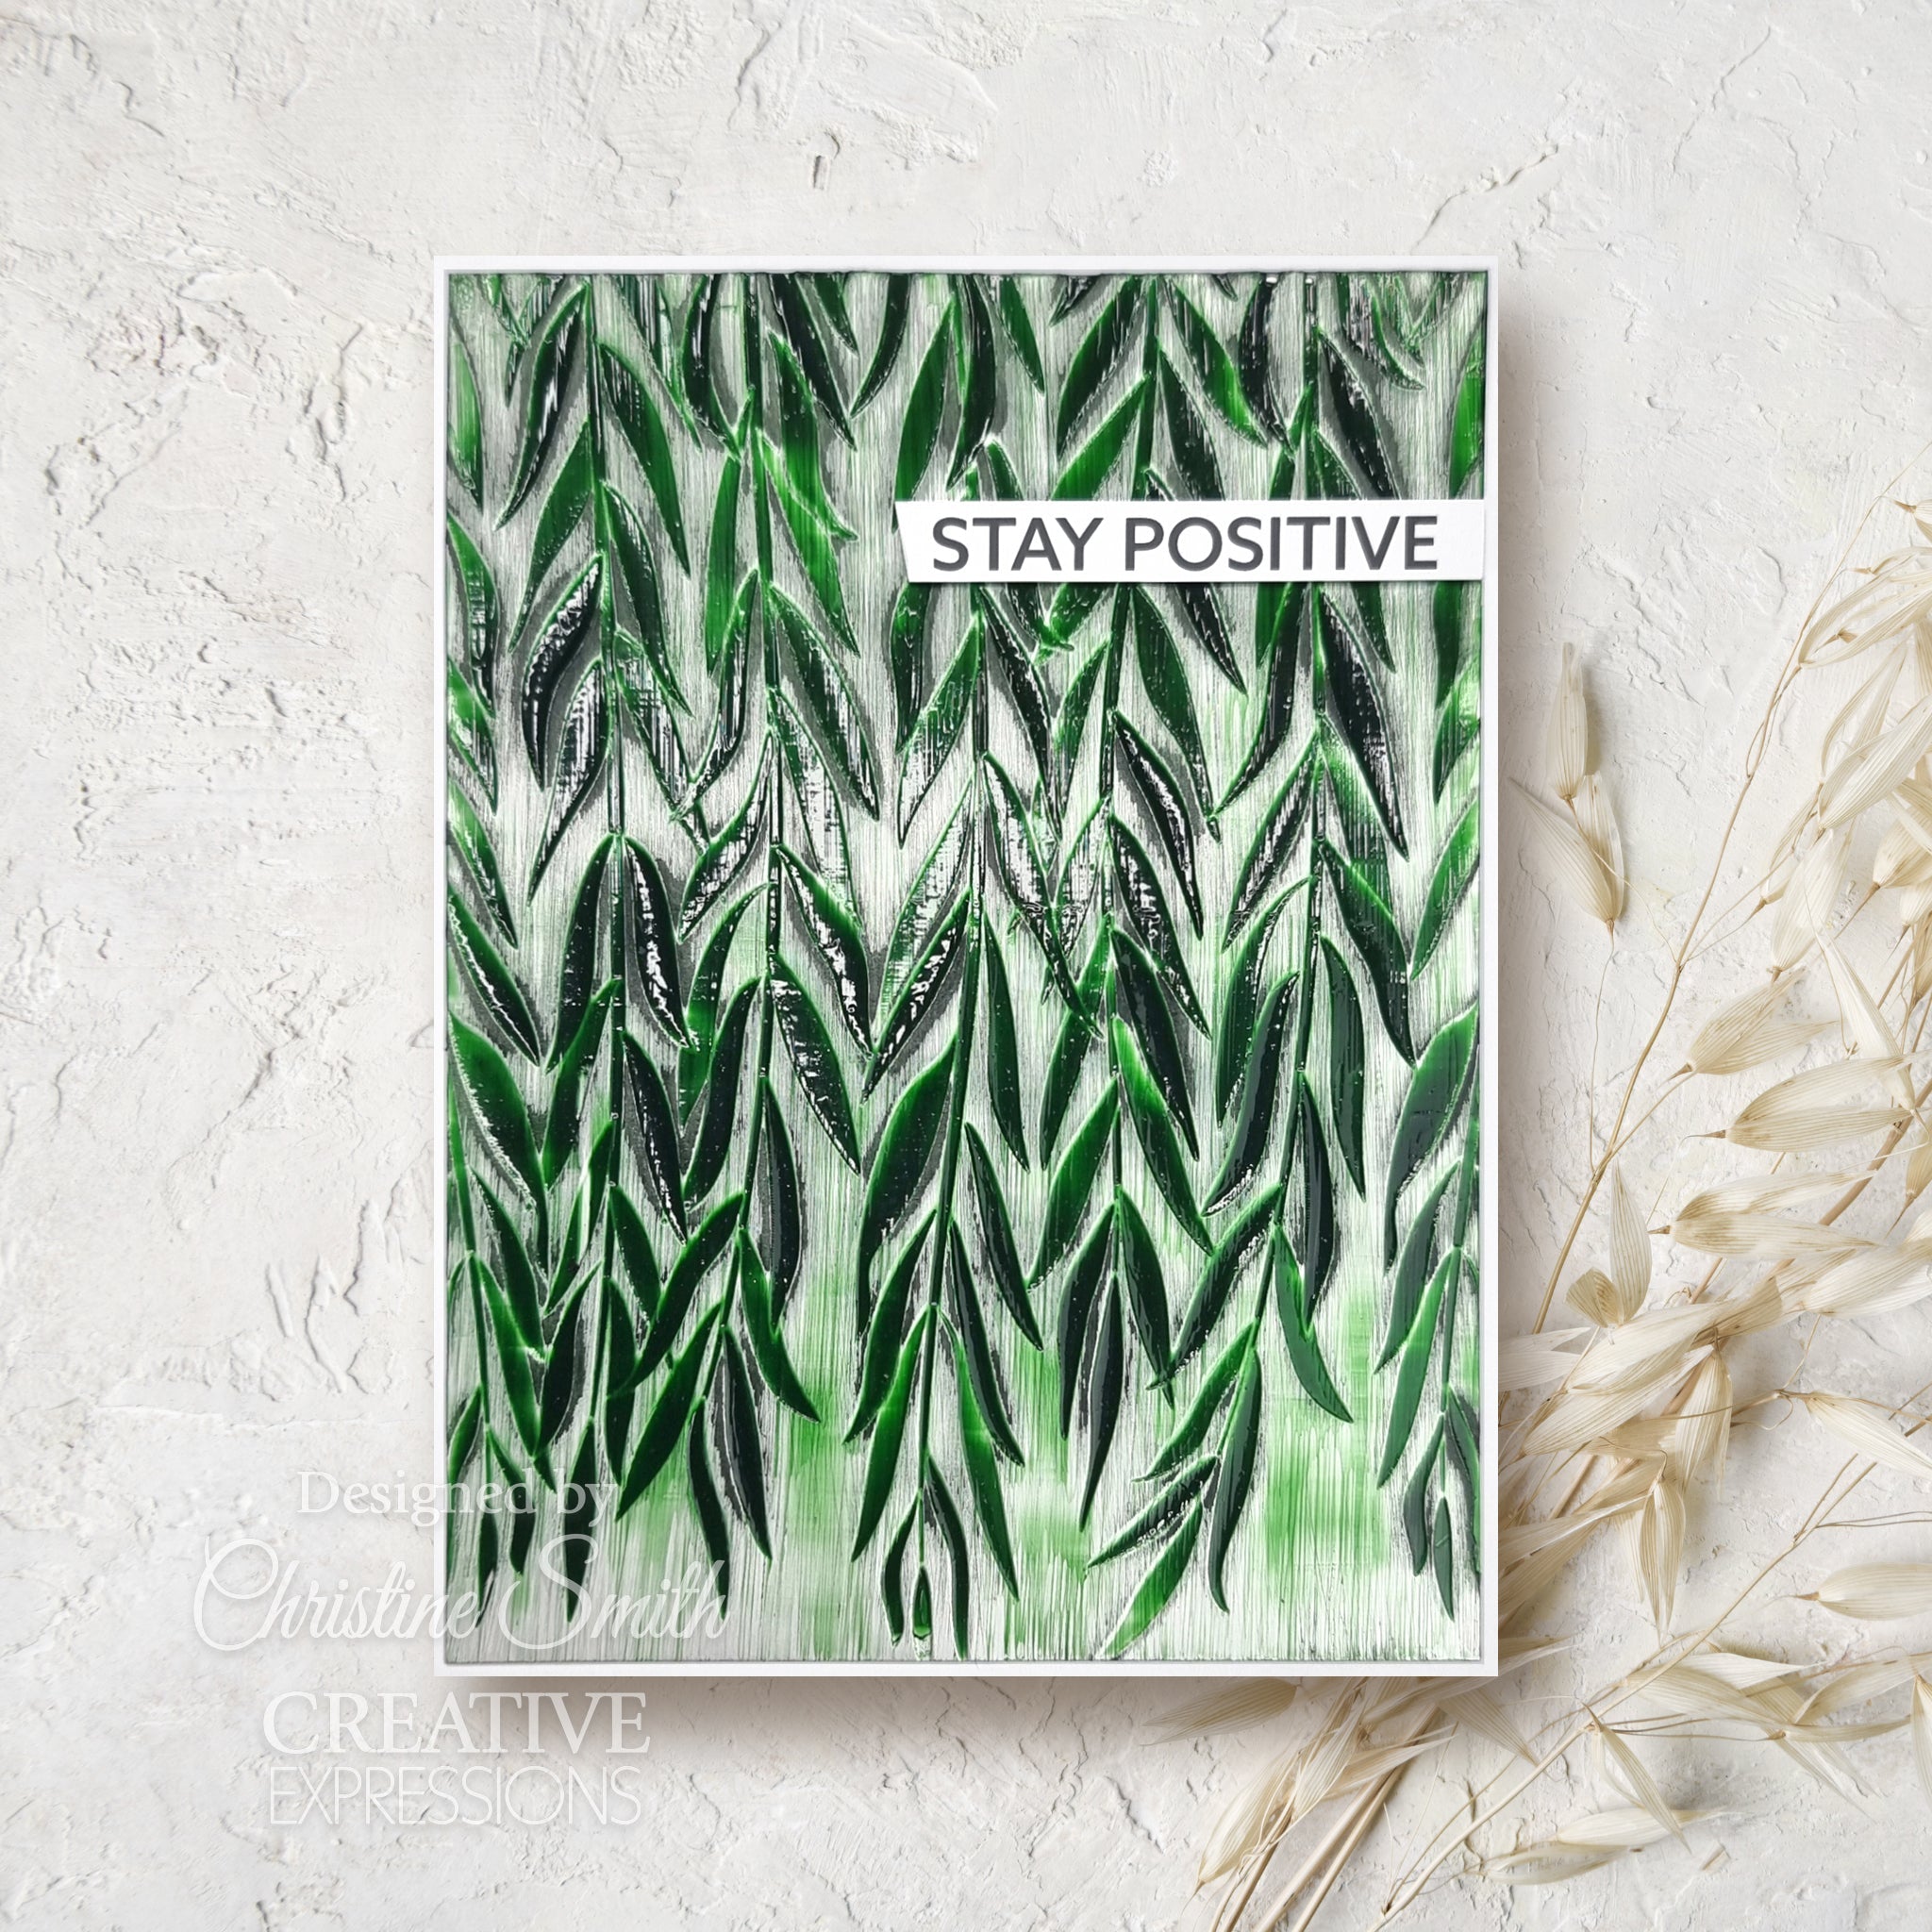 Creative Expressions Weeping Willow 5 in x 7 in 3D Embossing Folder